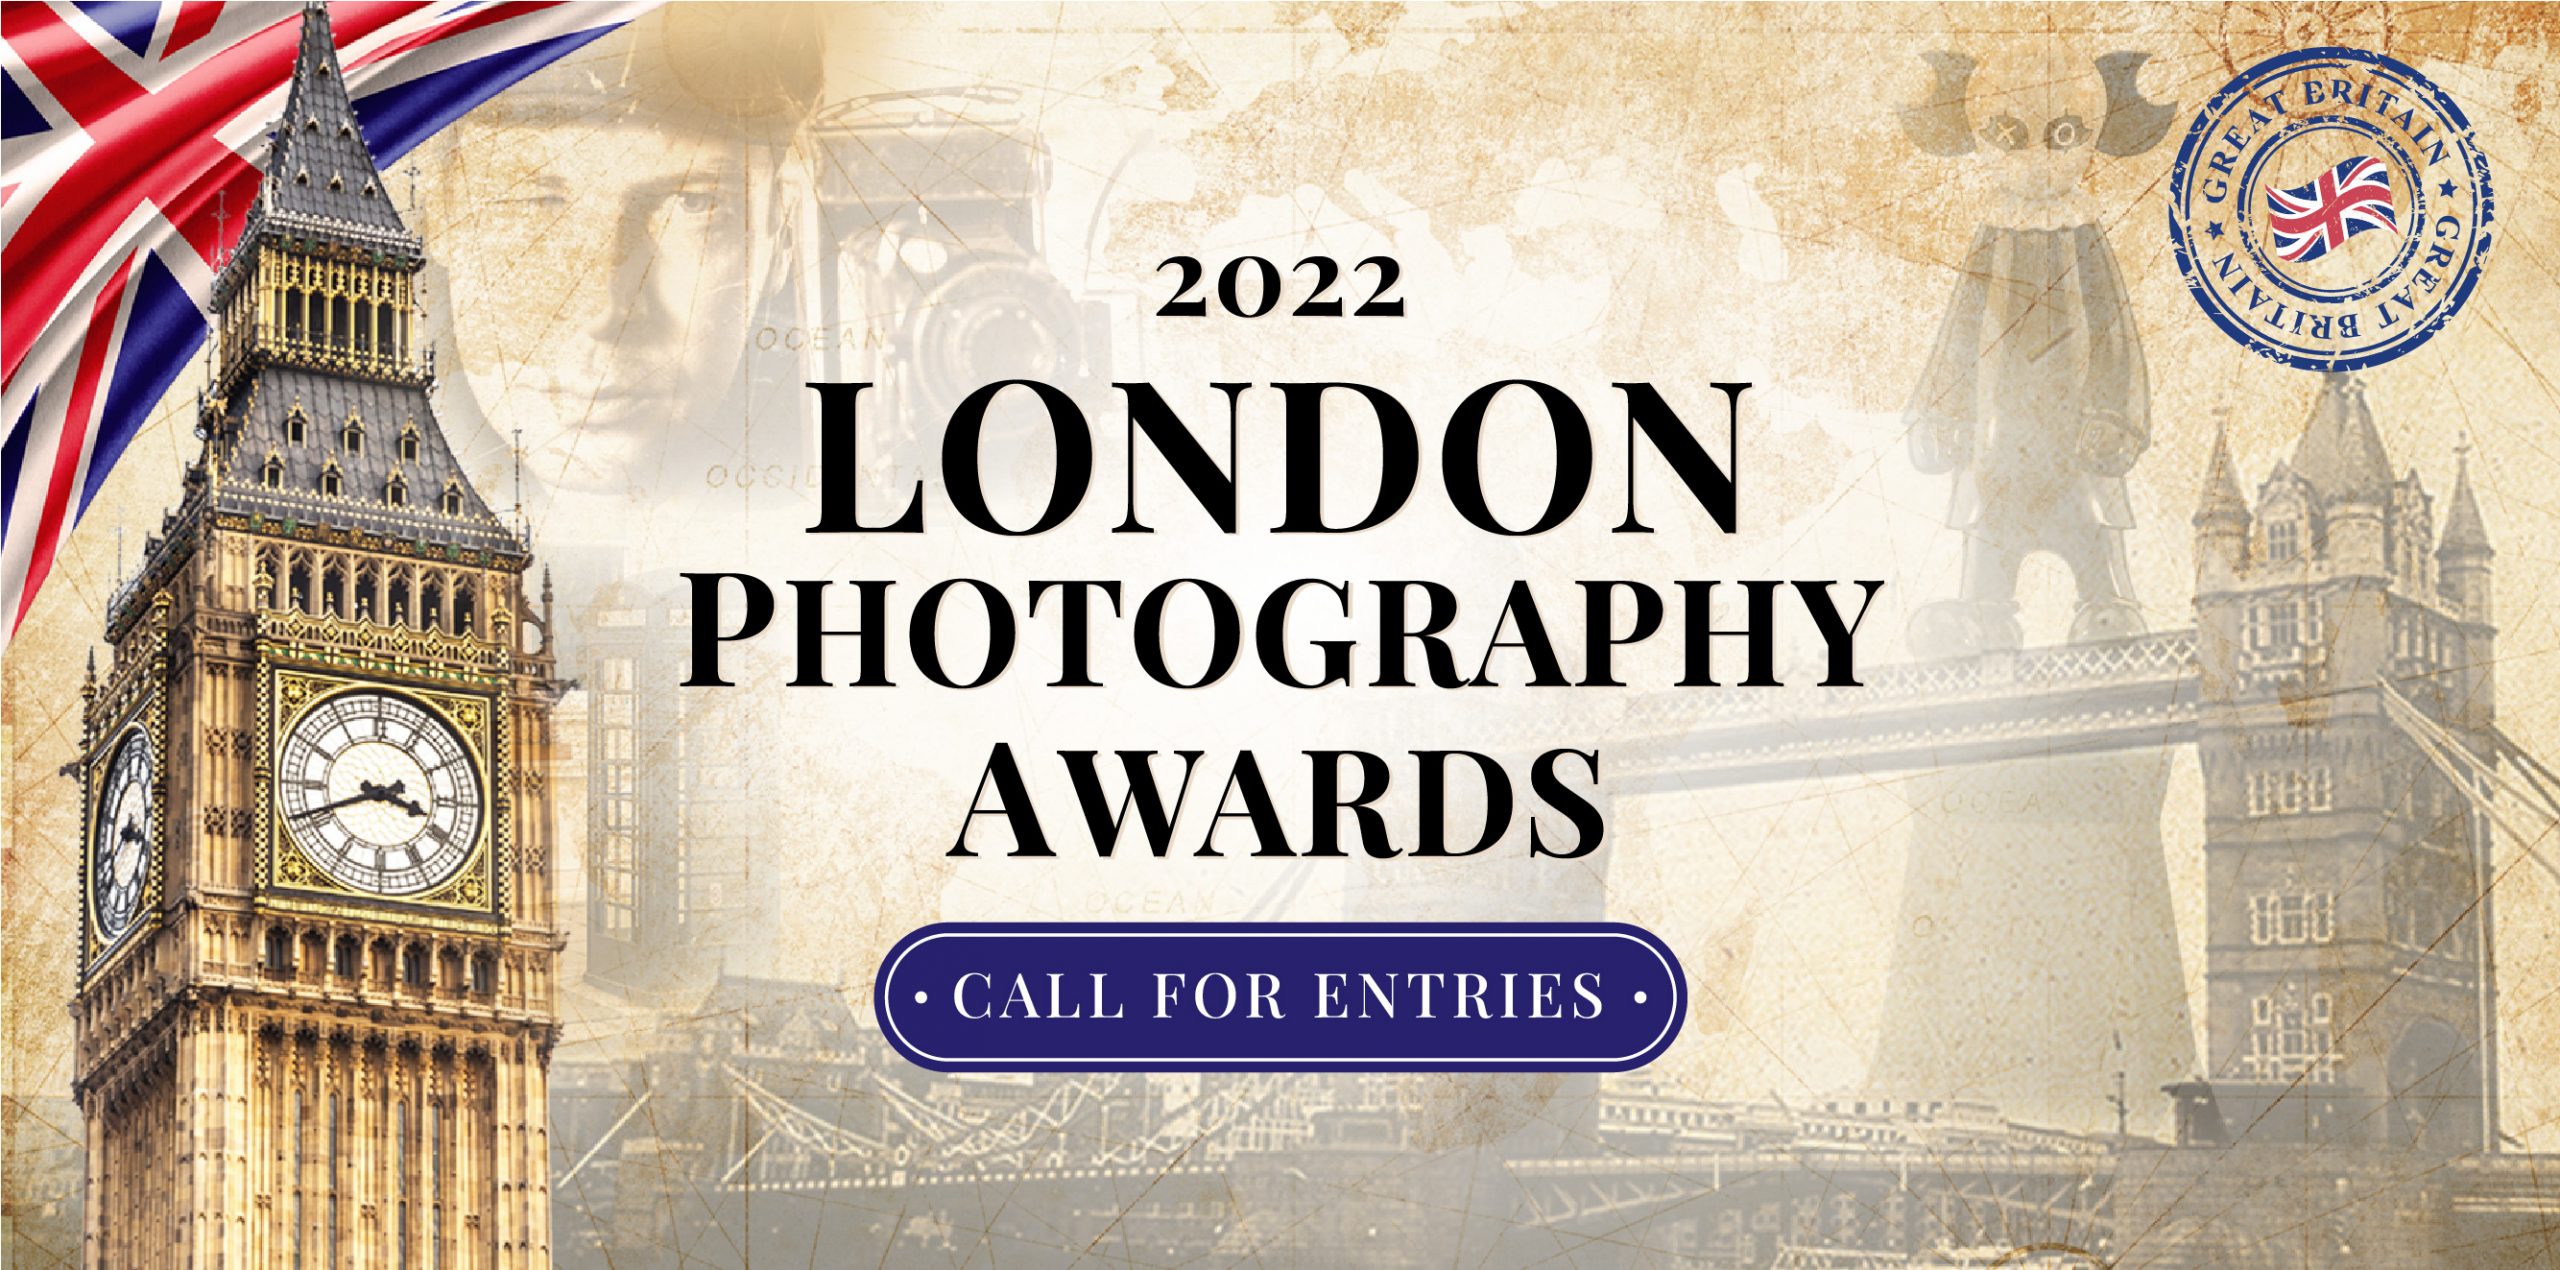 The 2022 London Photography Awards Emboldens Photographers to Forge Your Own Time-Lapse